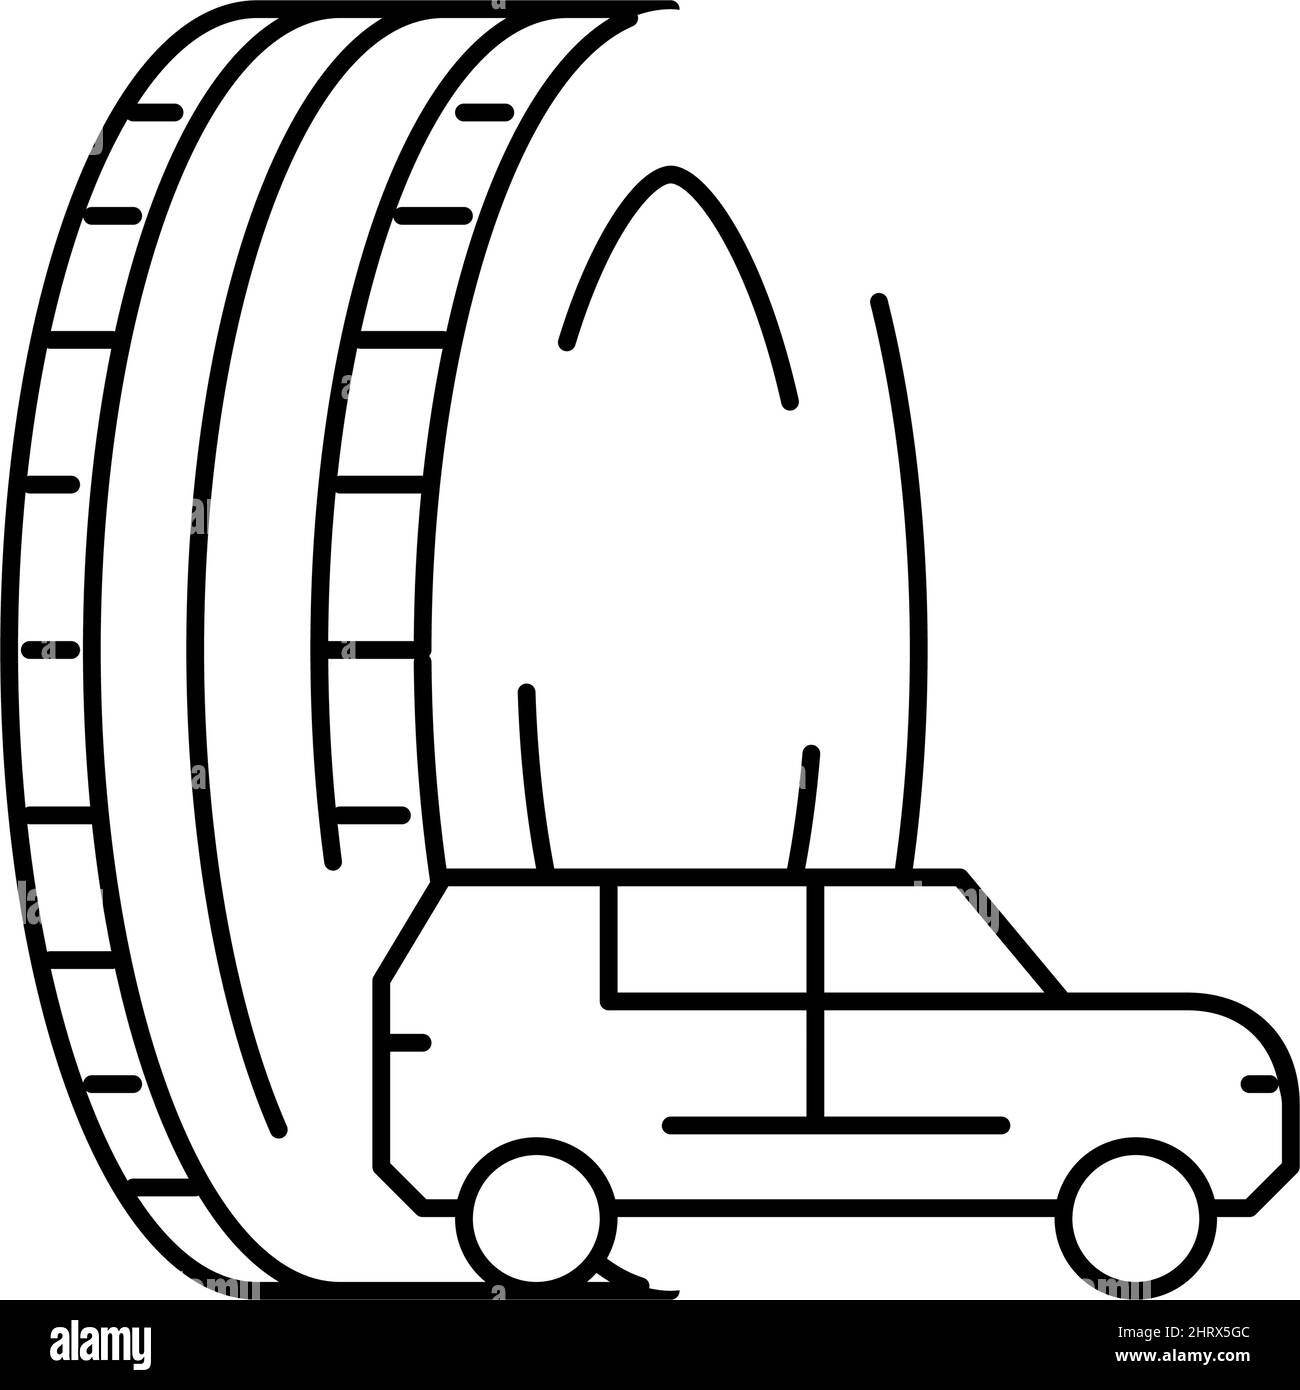 truck or suv tires line icon vector illustration Stock Vector